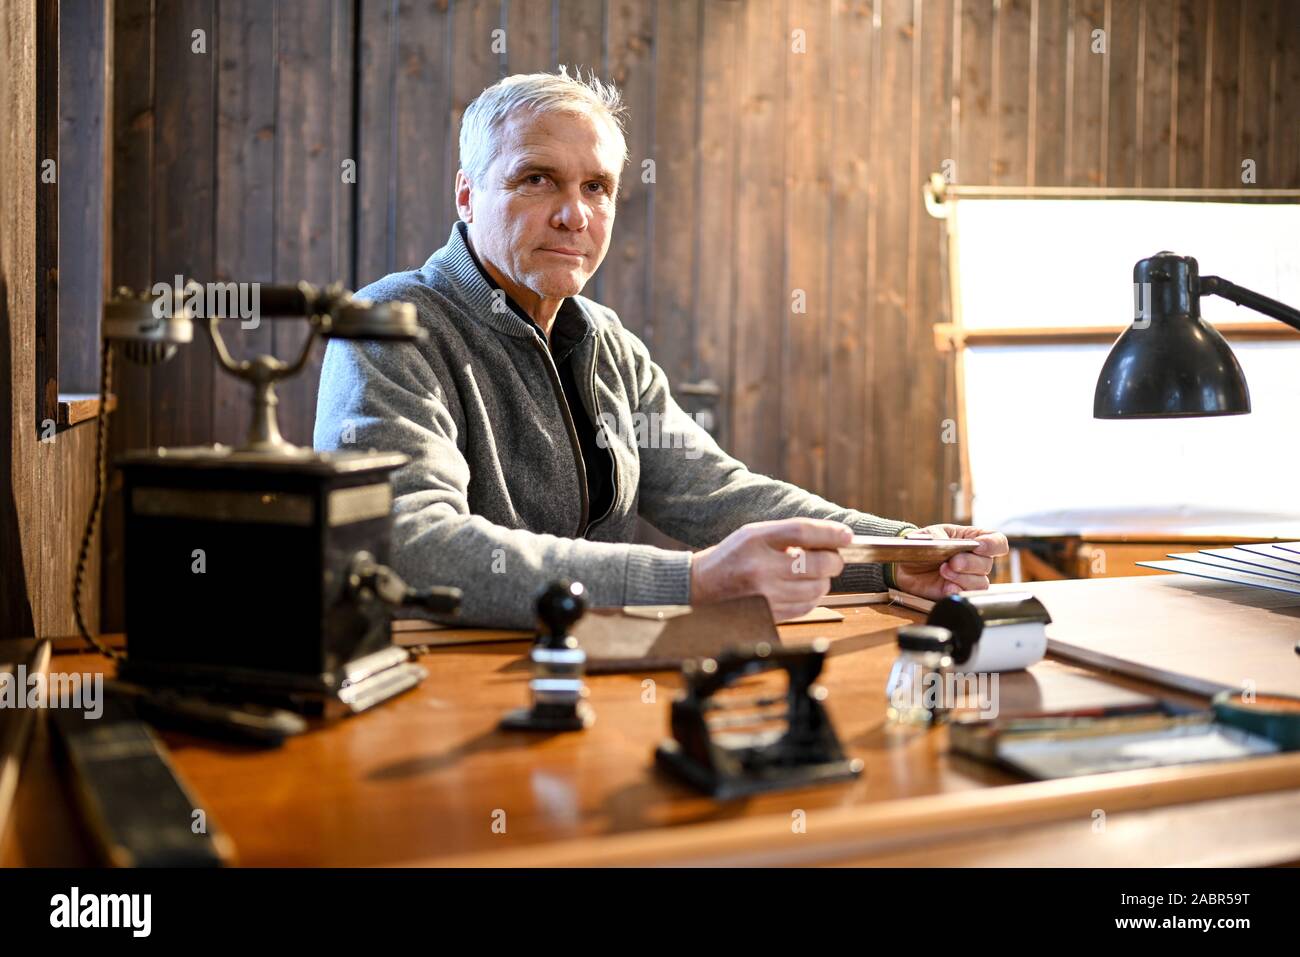 Friedrichshafen, Germany. 25th Nov, 2019. David Dornier sits in the former barrack where his grandfather, the aircraft designer Claude Dornier, worked at Lake Constance. The company history of aircraft designer Claude Dornier began in 1914 in the barrack in Seemoos in Friedrichshafen. (to dpa: 'Computer scientist wants to rebuild famous flying boat Do X - without plans') Credit: Felix Kästle/dpa/Alamy Live News Stock Photo